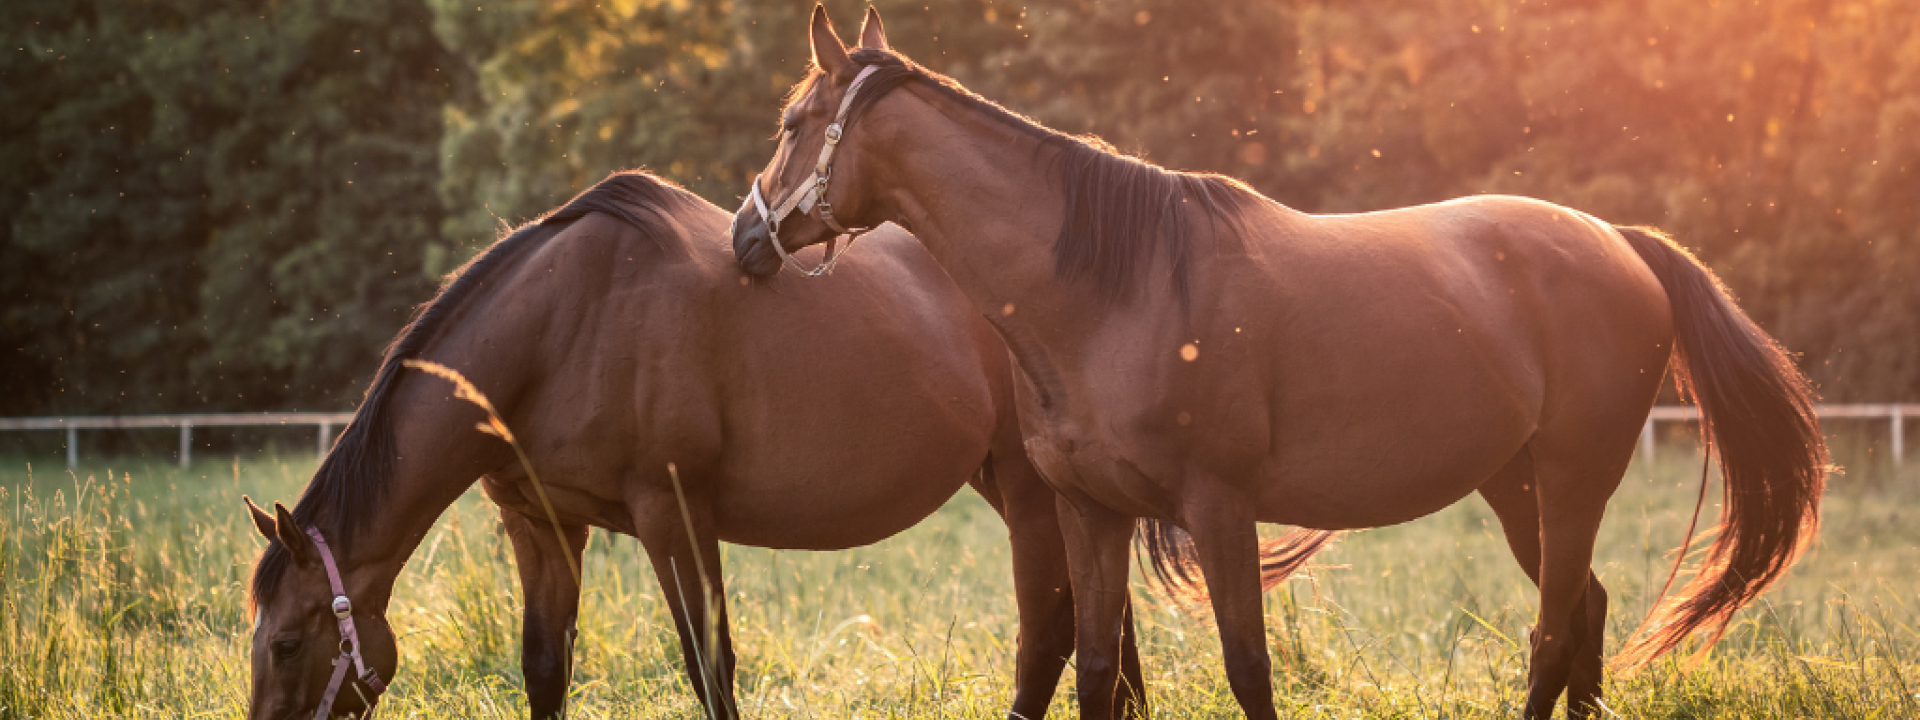 Horses grazing on pasture during sunset. Pregnant mare of thoroughbred horse.